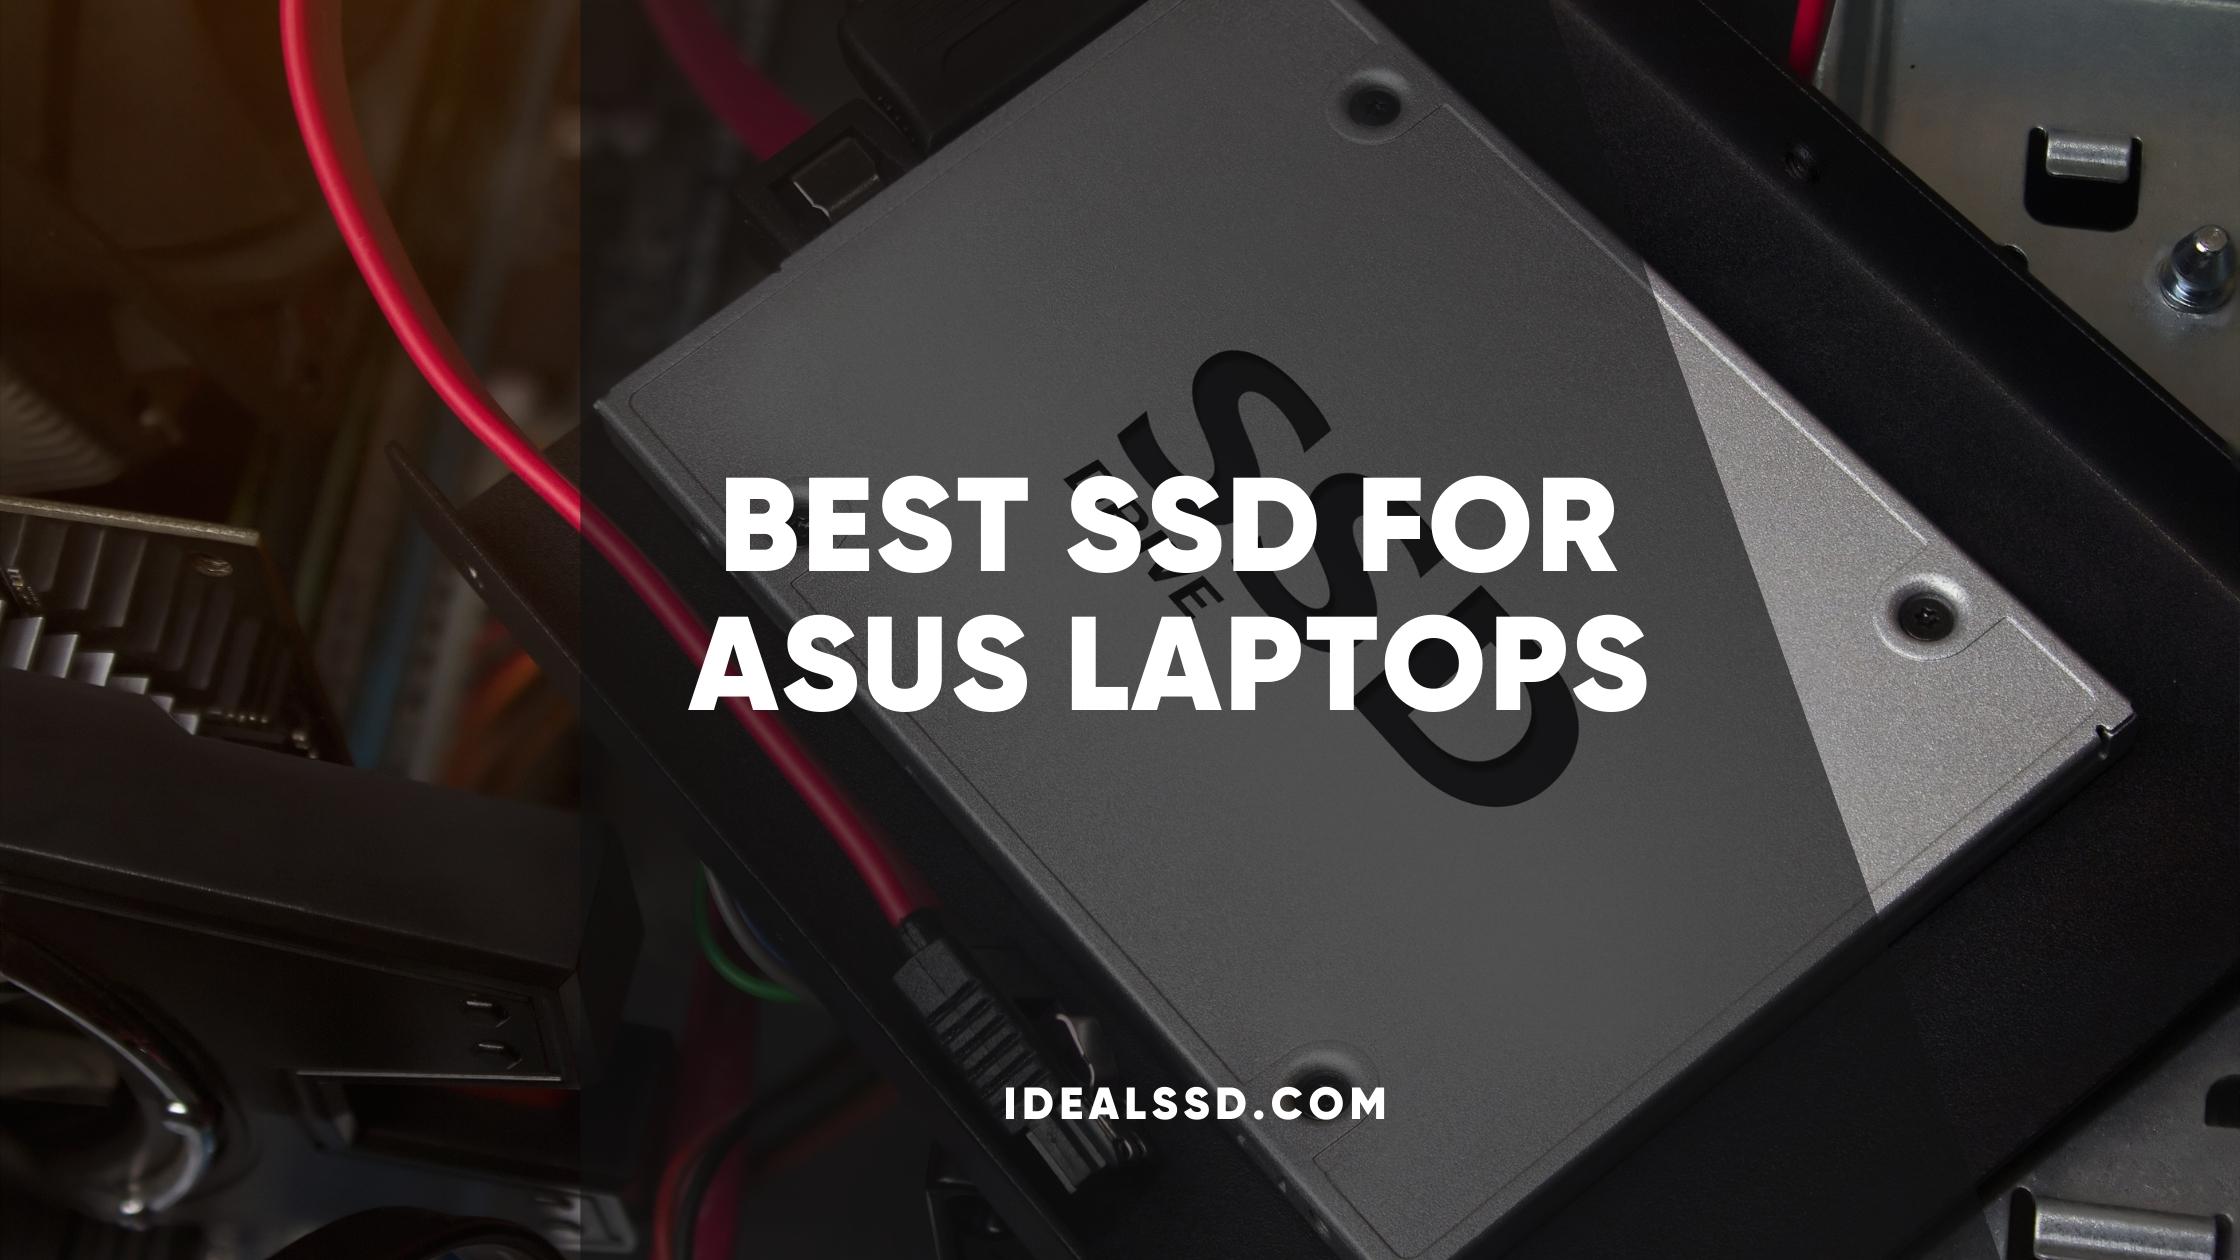 Best SSD for Asus laptops